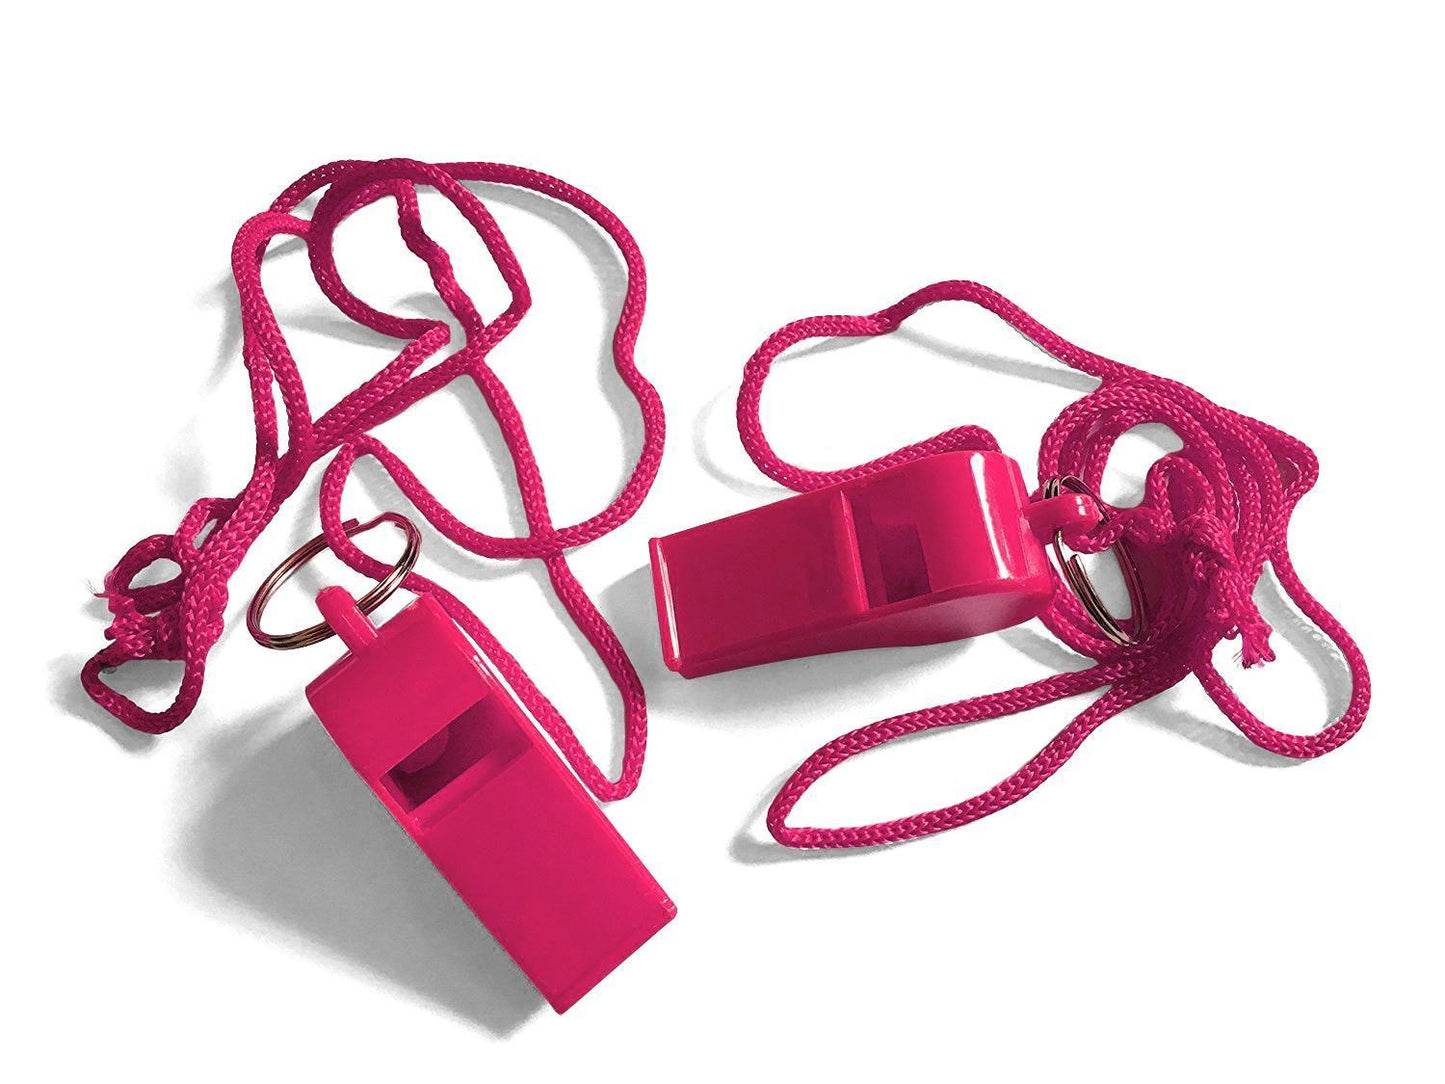 Bag of 100 Pink Plastic Whistles with Lanyard Neck Cord